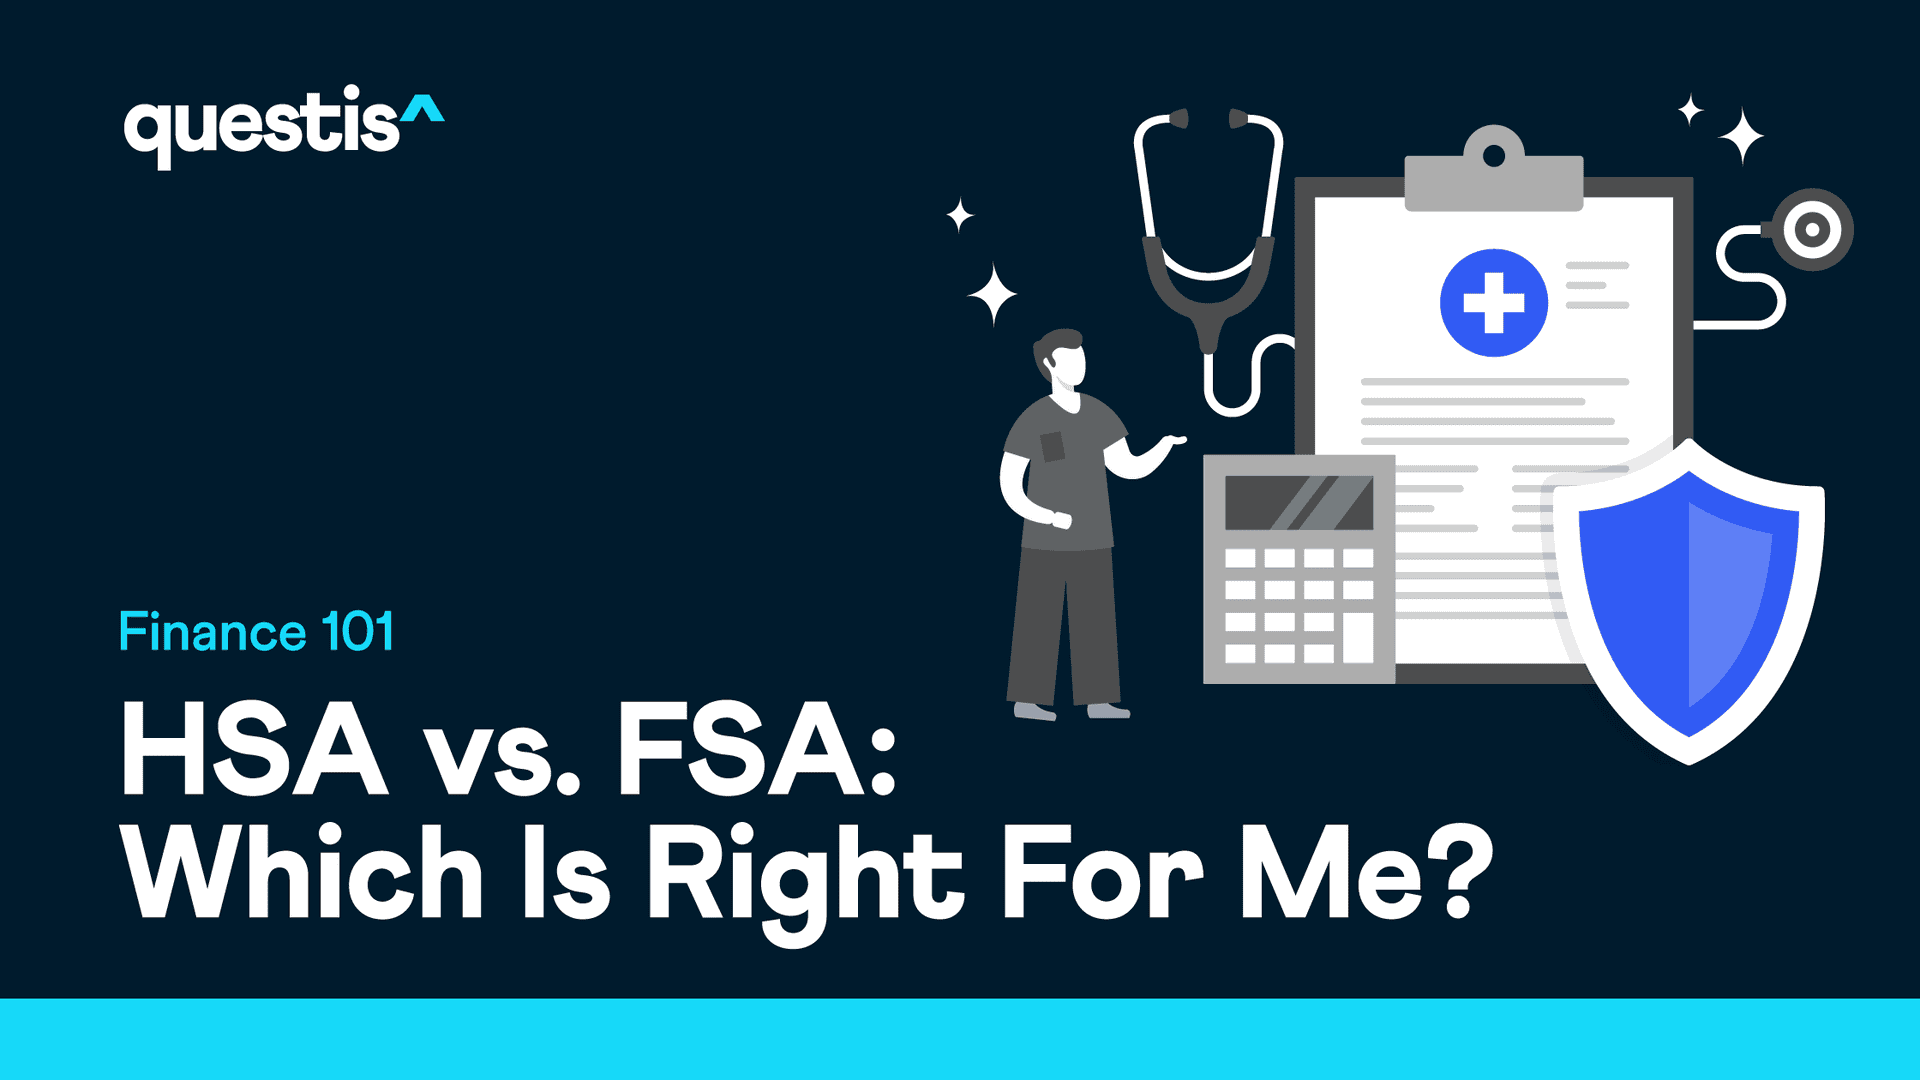 HSA vs FSA Differences: Which Is Right For Me?